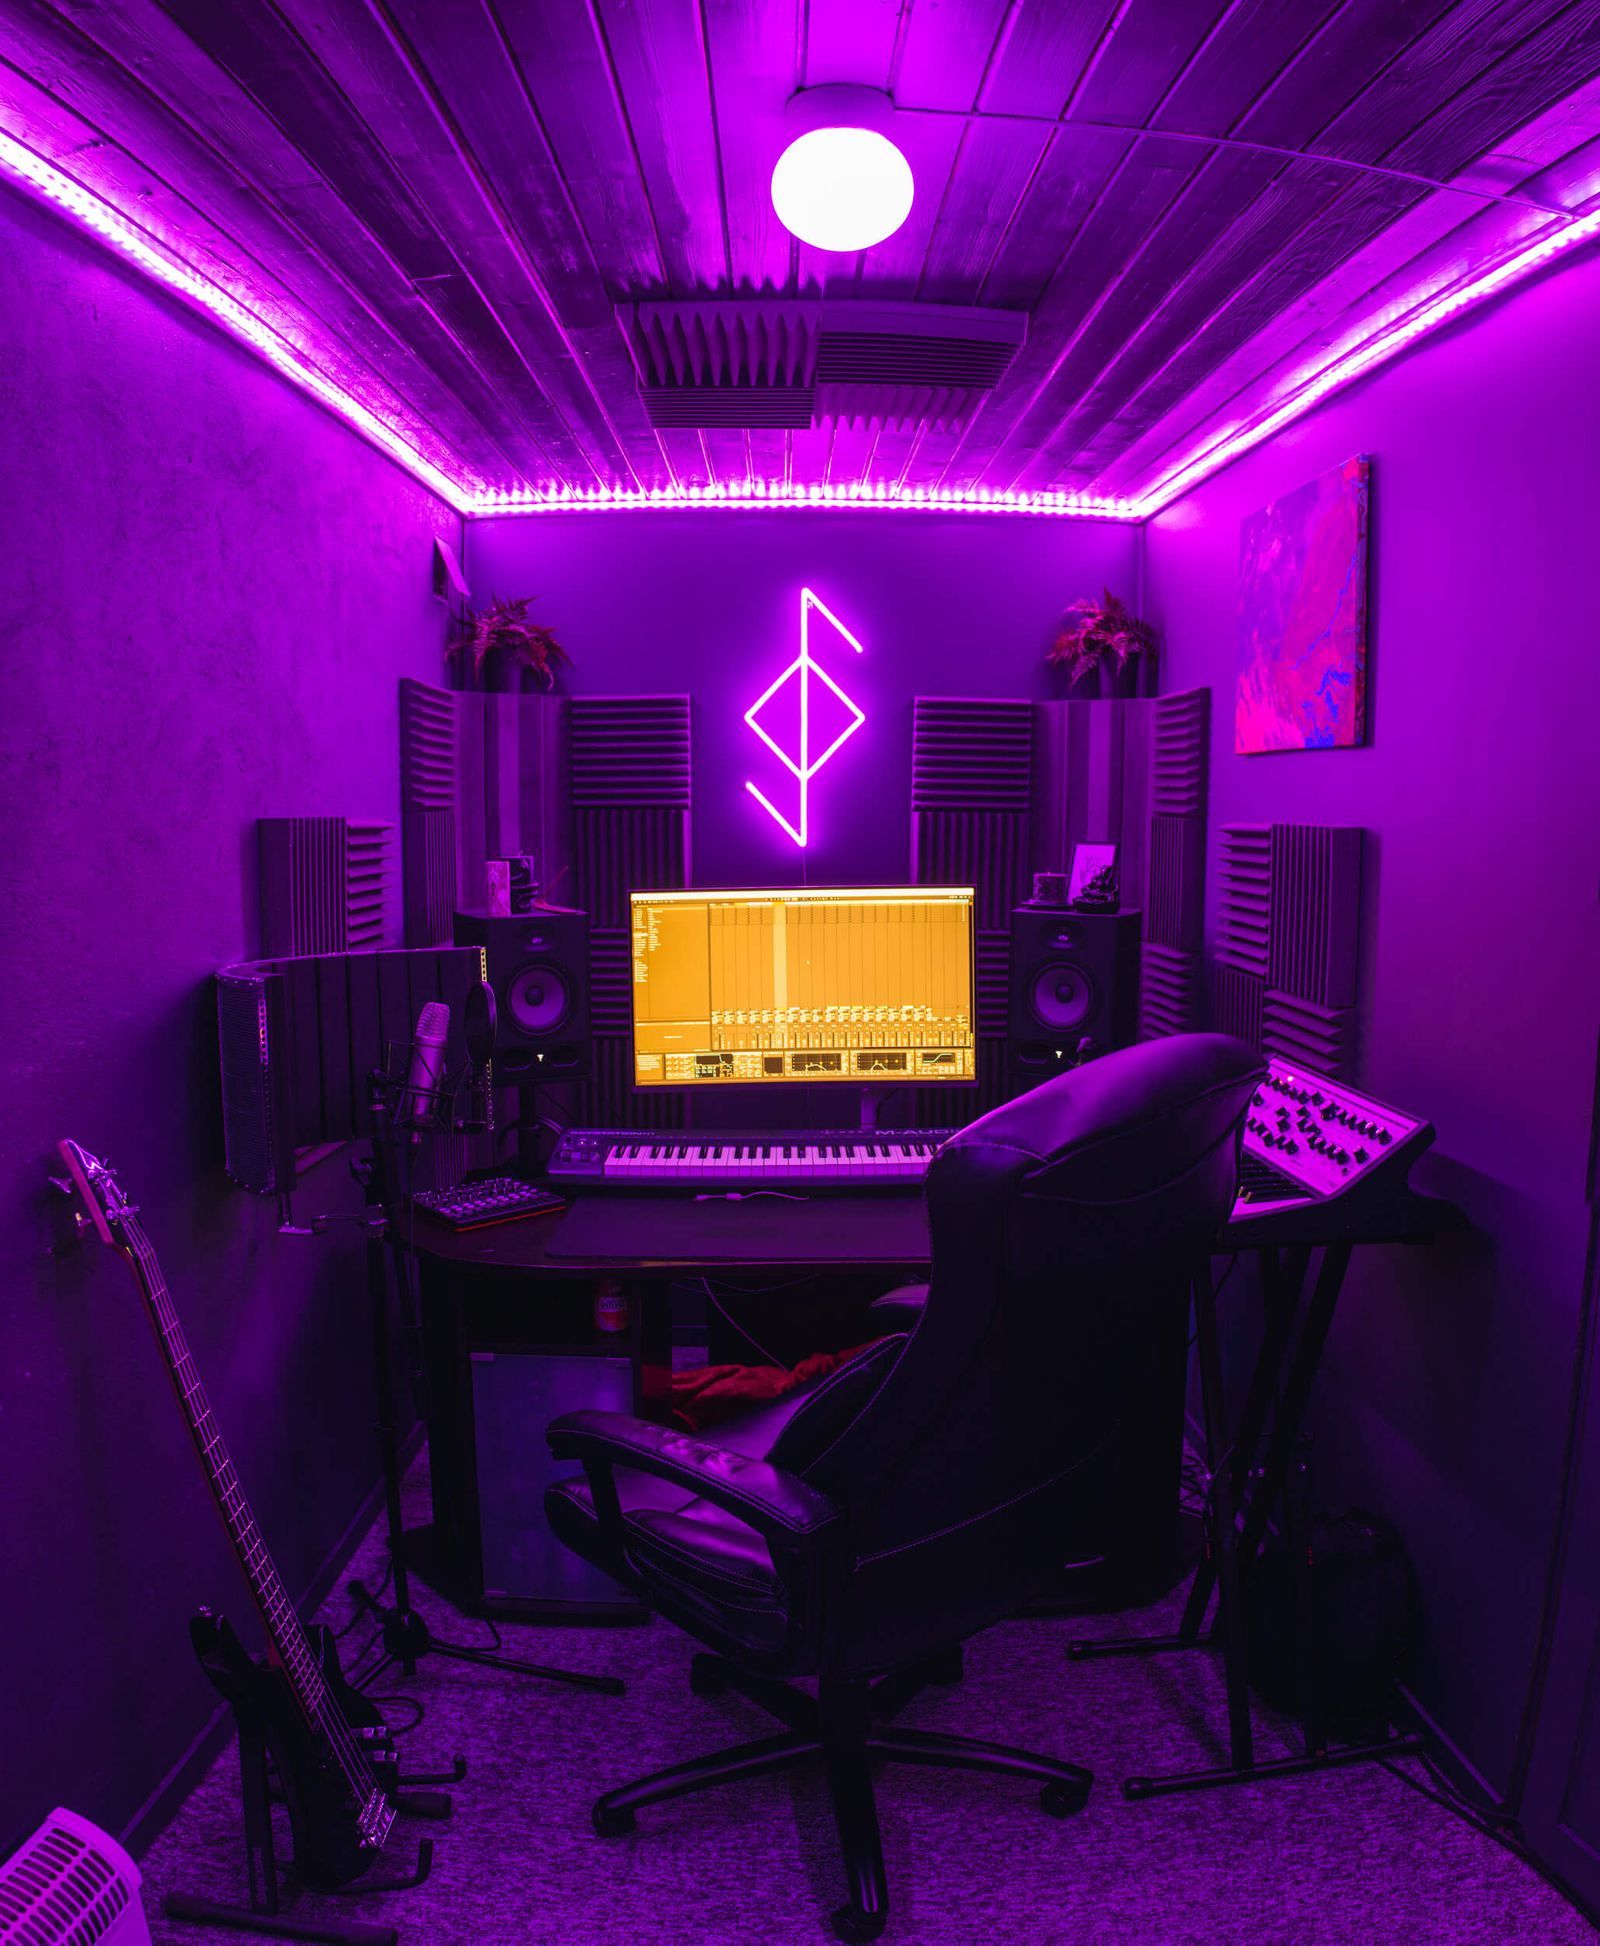 A small and moody music studio in the basement